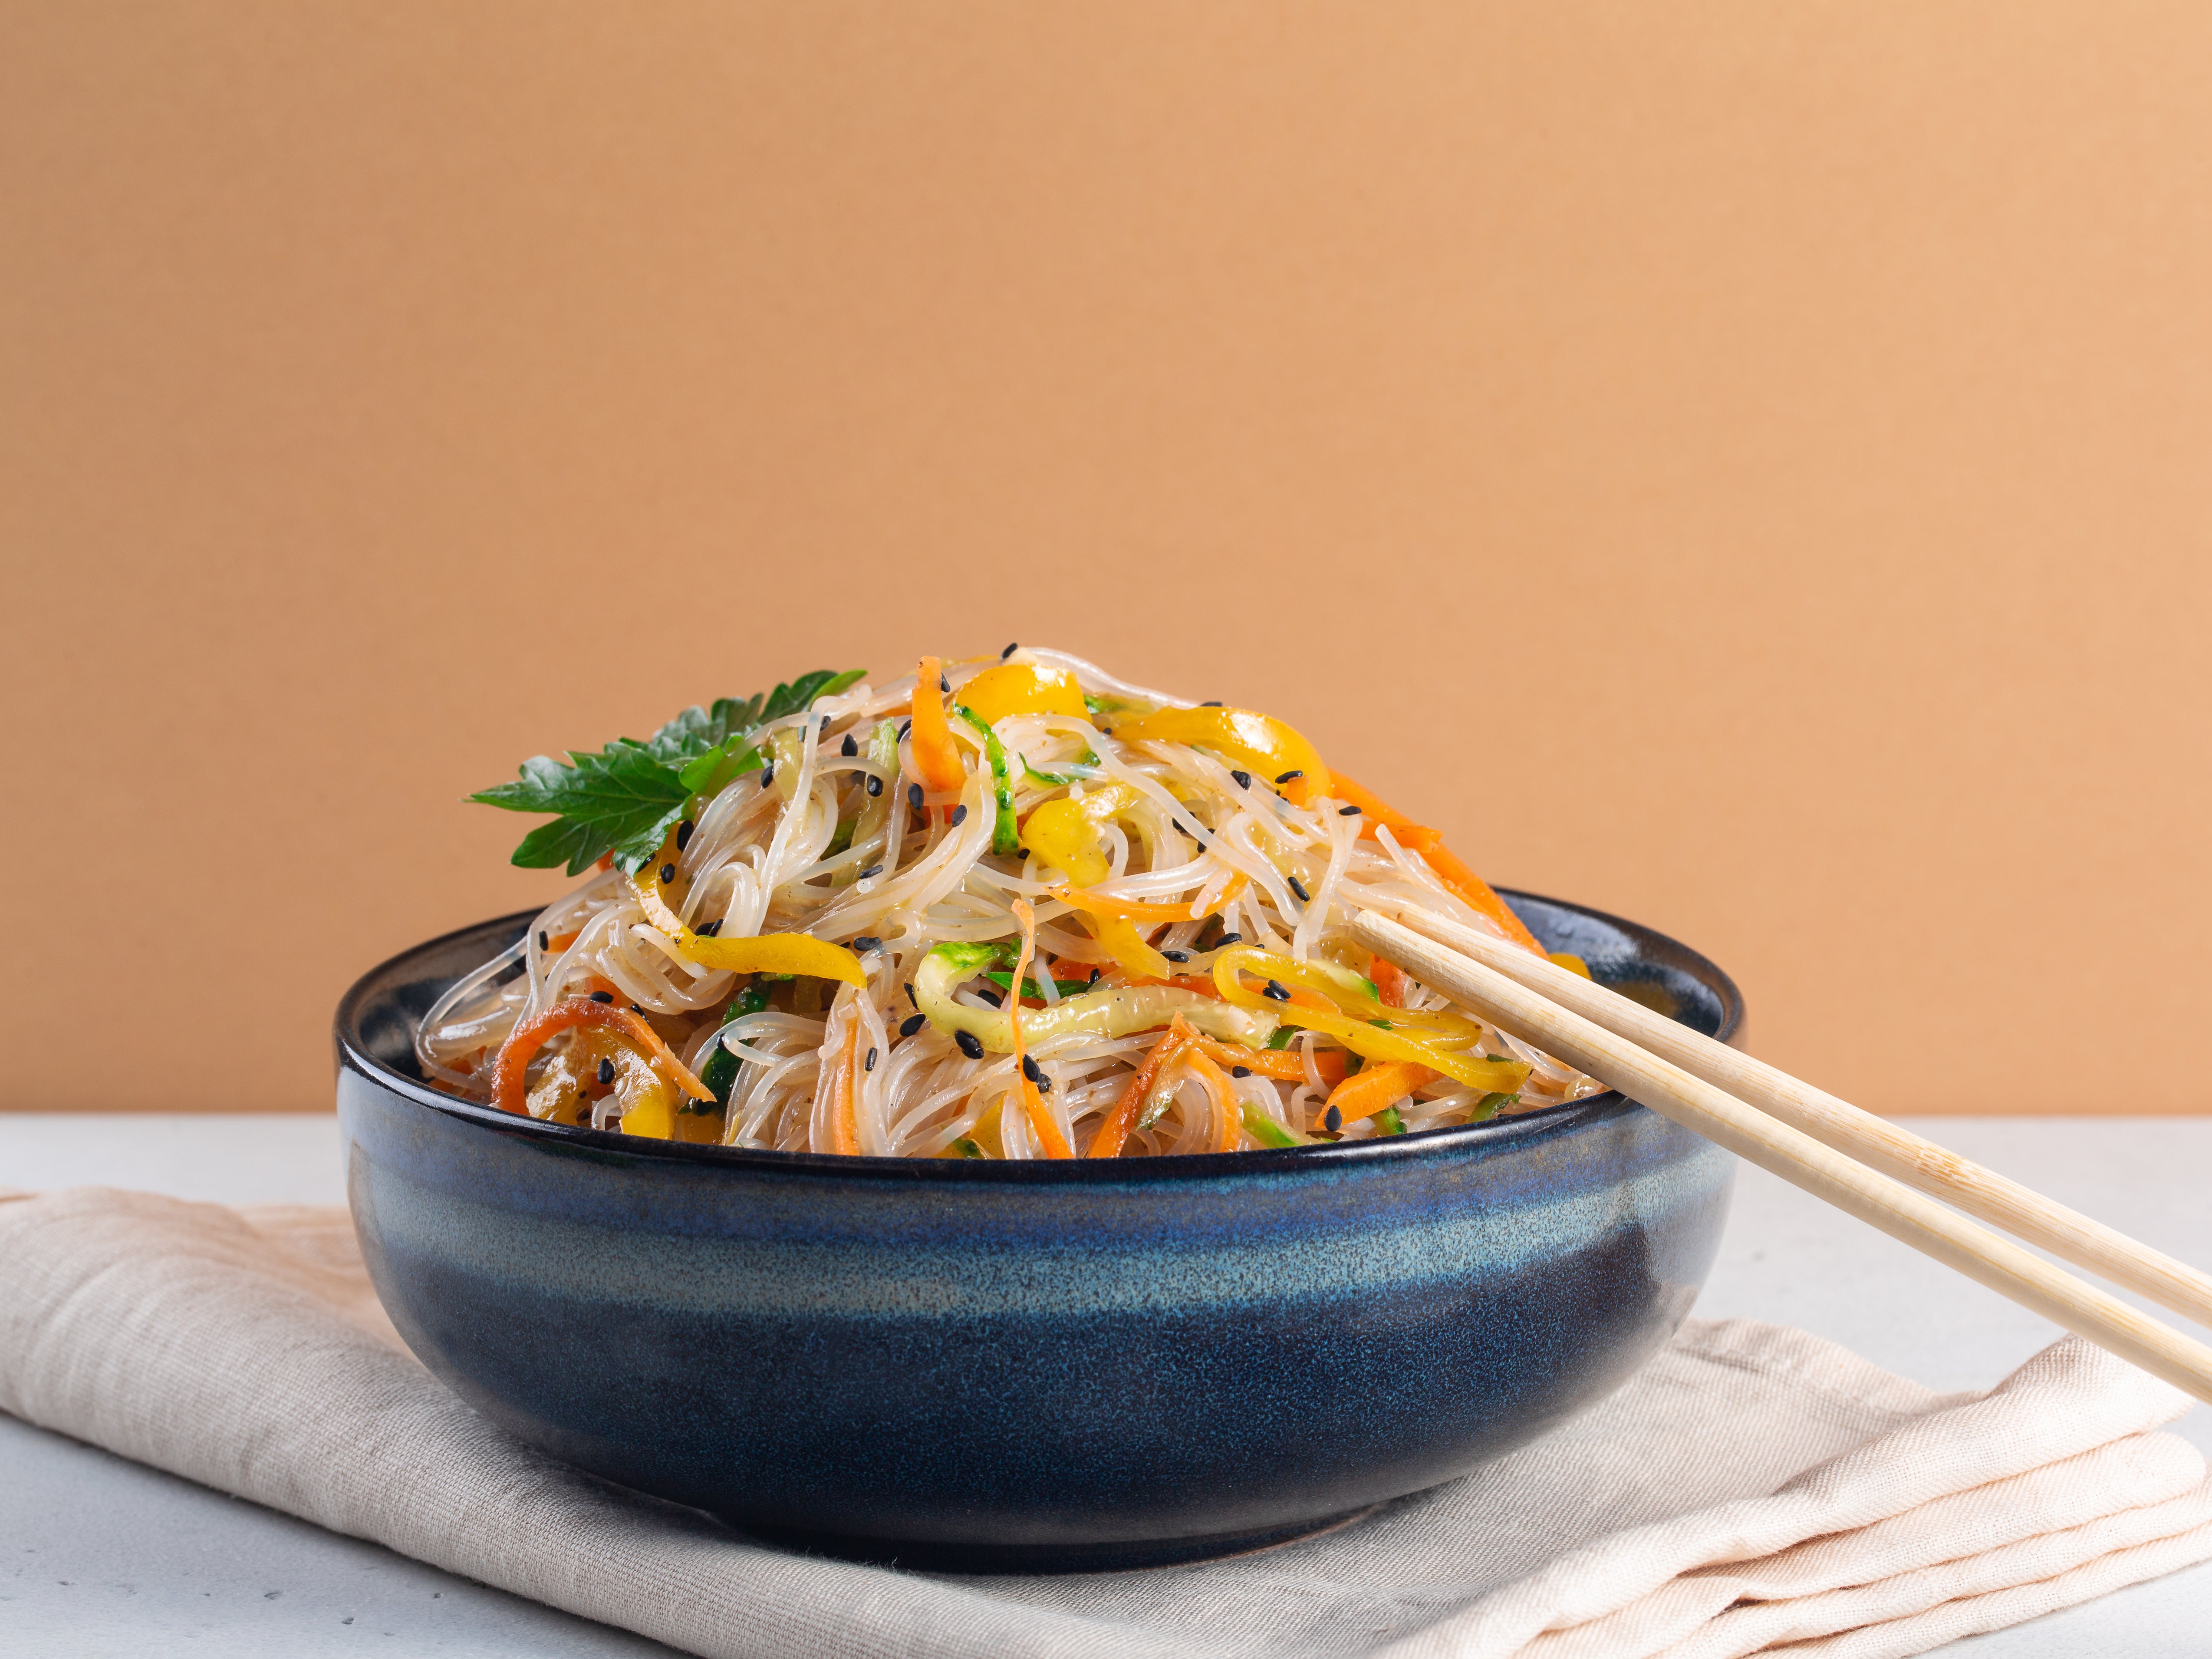 Japchae is a savoury Korean stir-fry with mixed vegetables, beef and sweet potato noodles